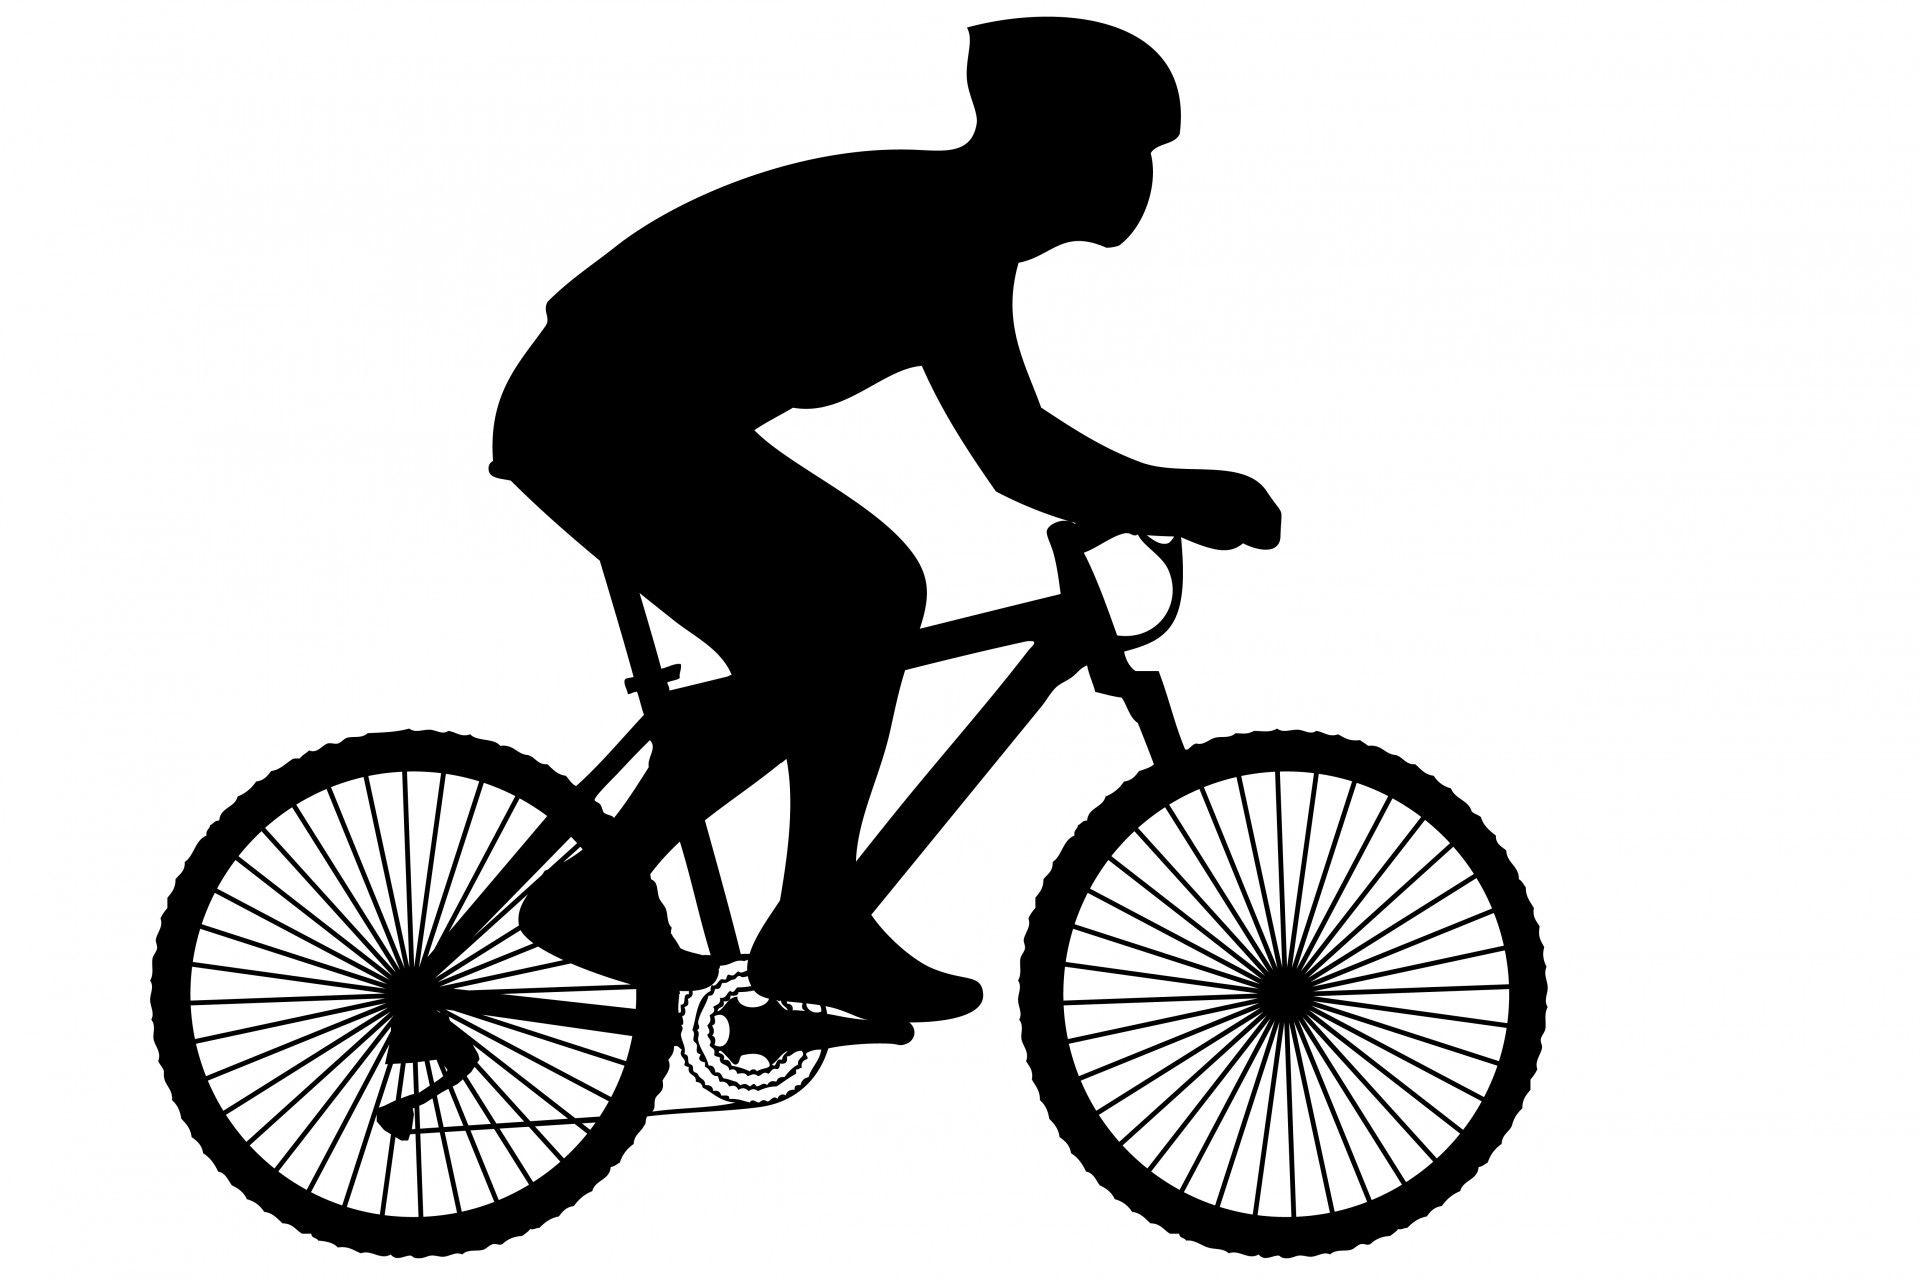 Black silhouette of a cyclist on a racing bike clipart.